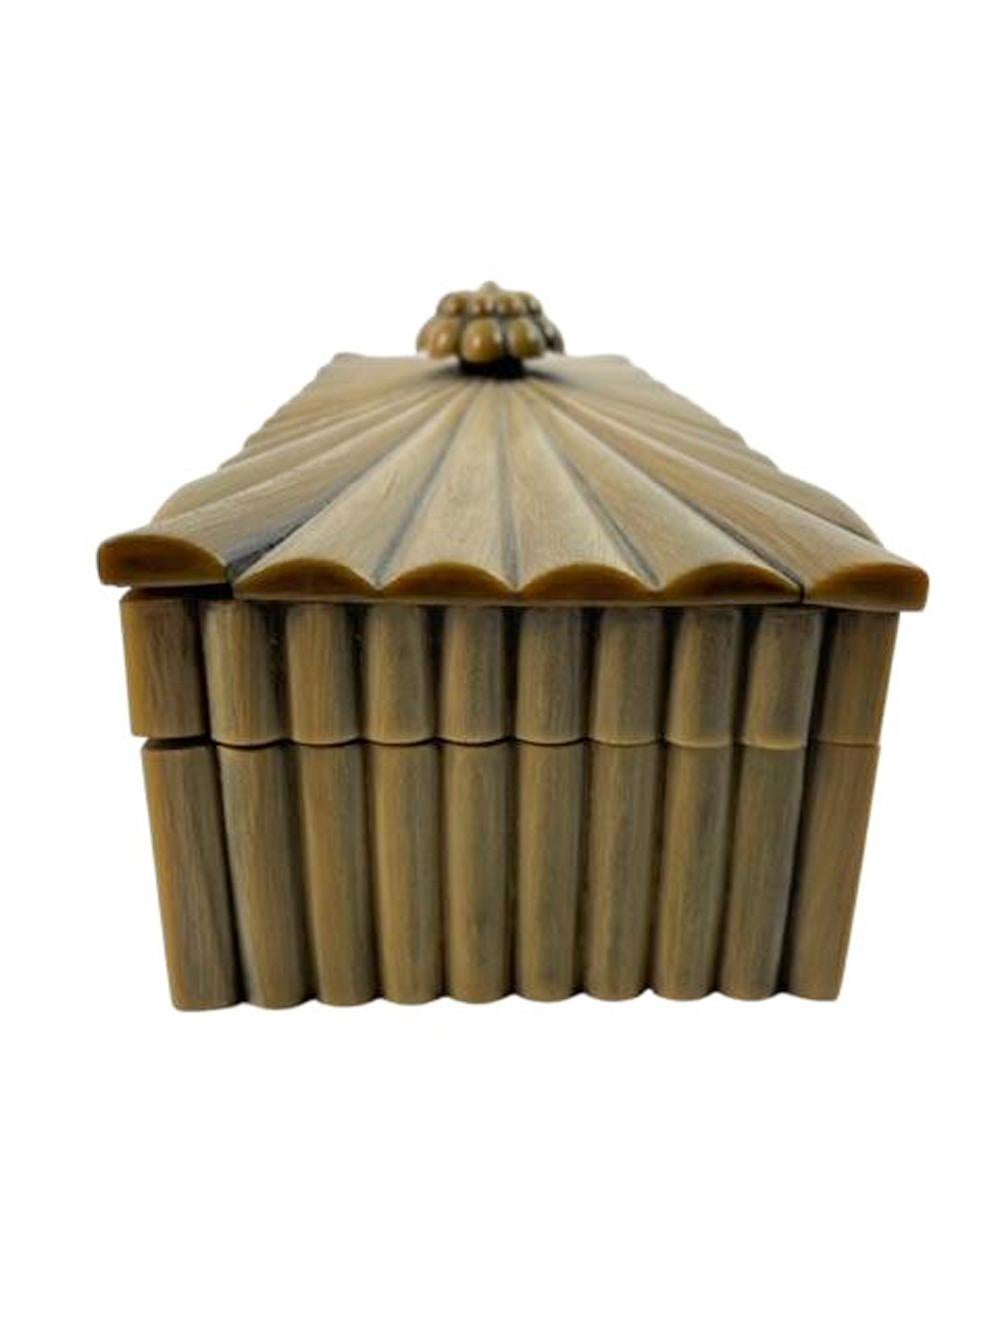 Anglo-Indian glove or trinket box from Vizagapatam of rectangular form with sloped top. Made from sandalwood with vertically ribbed horn veneered sides and starburst ribbed lid with central carved horn finial knob of lotus bud form. The horn of a